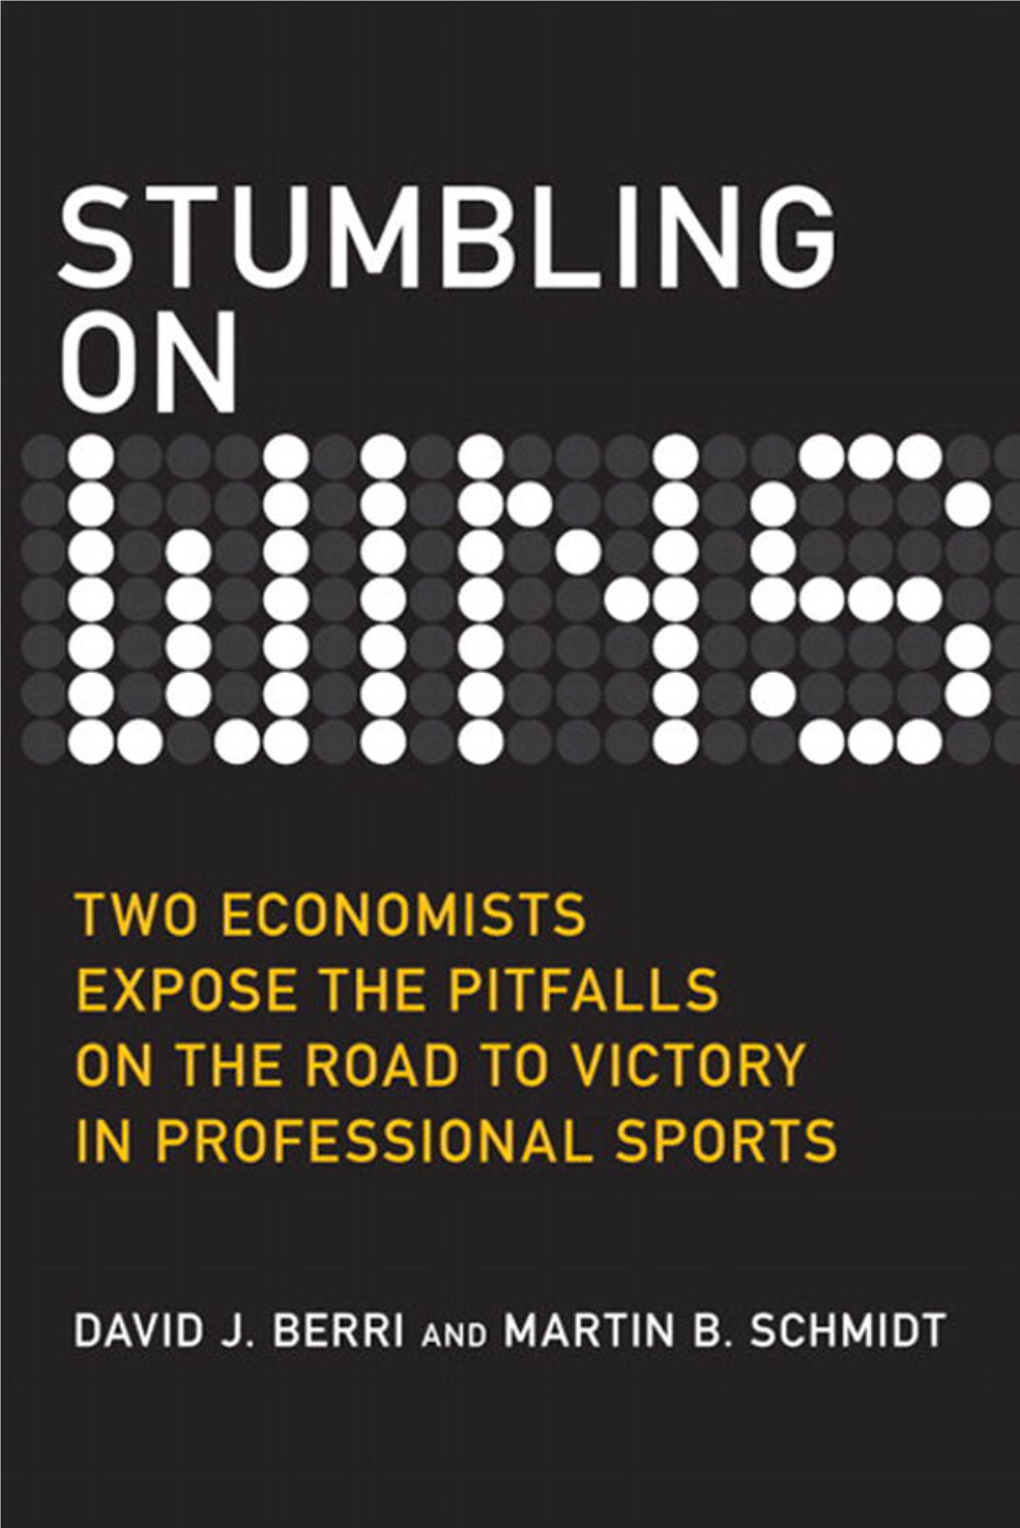 Stumbling on Wins This Page Intentionally Left Blank Stumbling on Wins Two Economists Expose the Pitfalls on the Road to Victory in Professional Sports